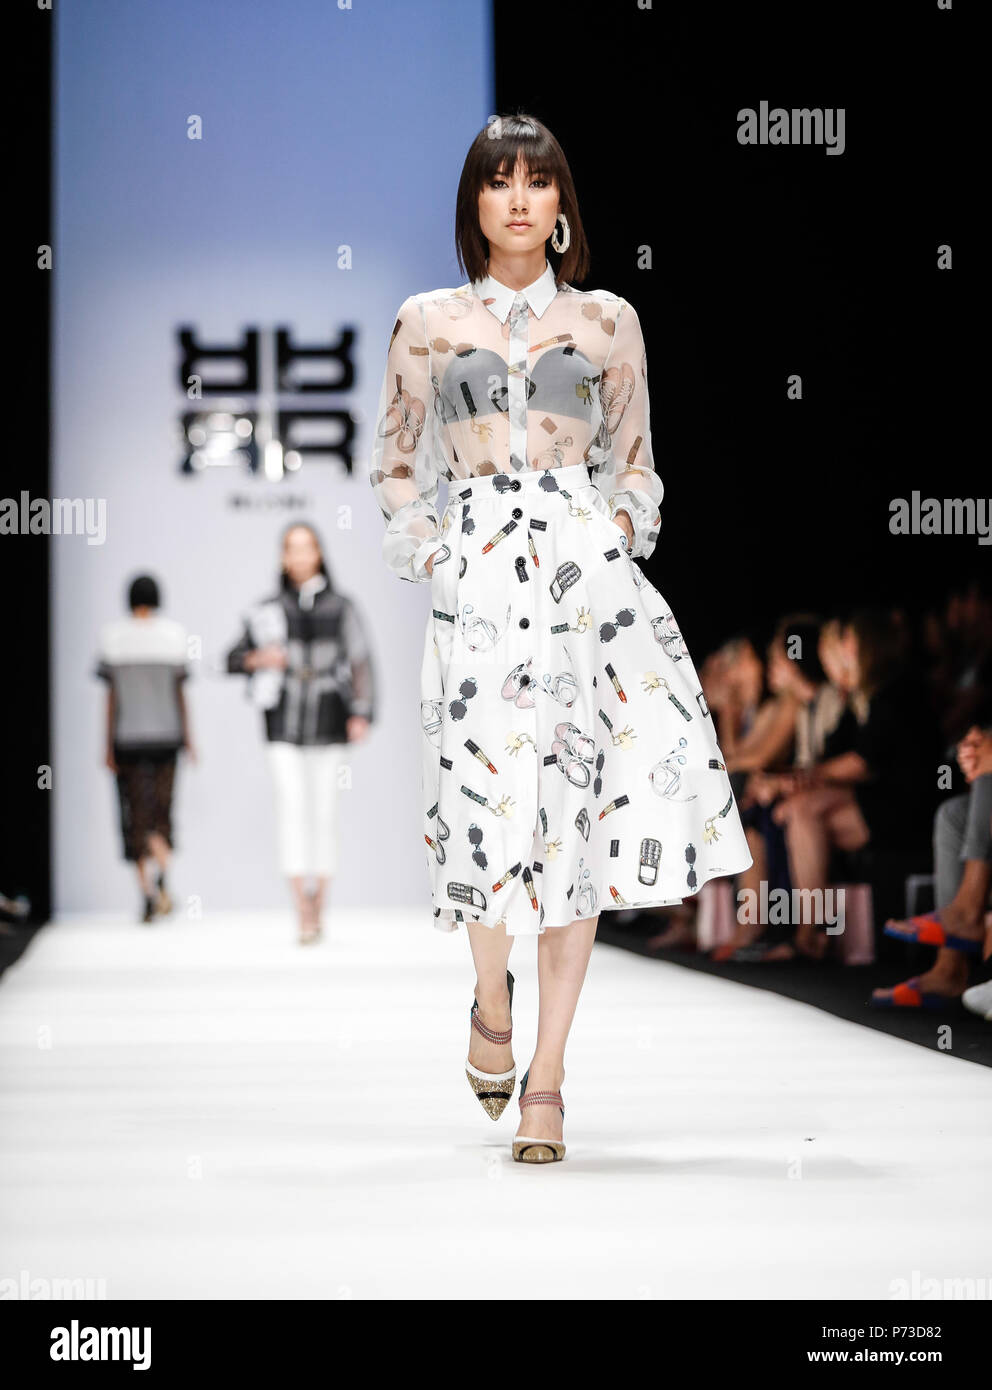 Berlin, Germany - July 4, 2018: Models presents a Spring/Summer 2019 Riani collection during the second day of MBFW Berlin Fashion Weak in the ewerk showspace in Berlin Stock Photo